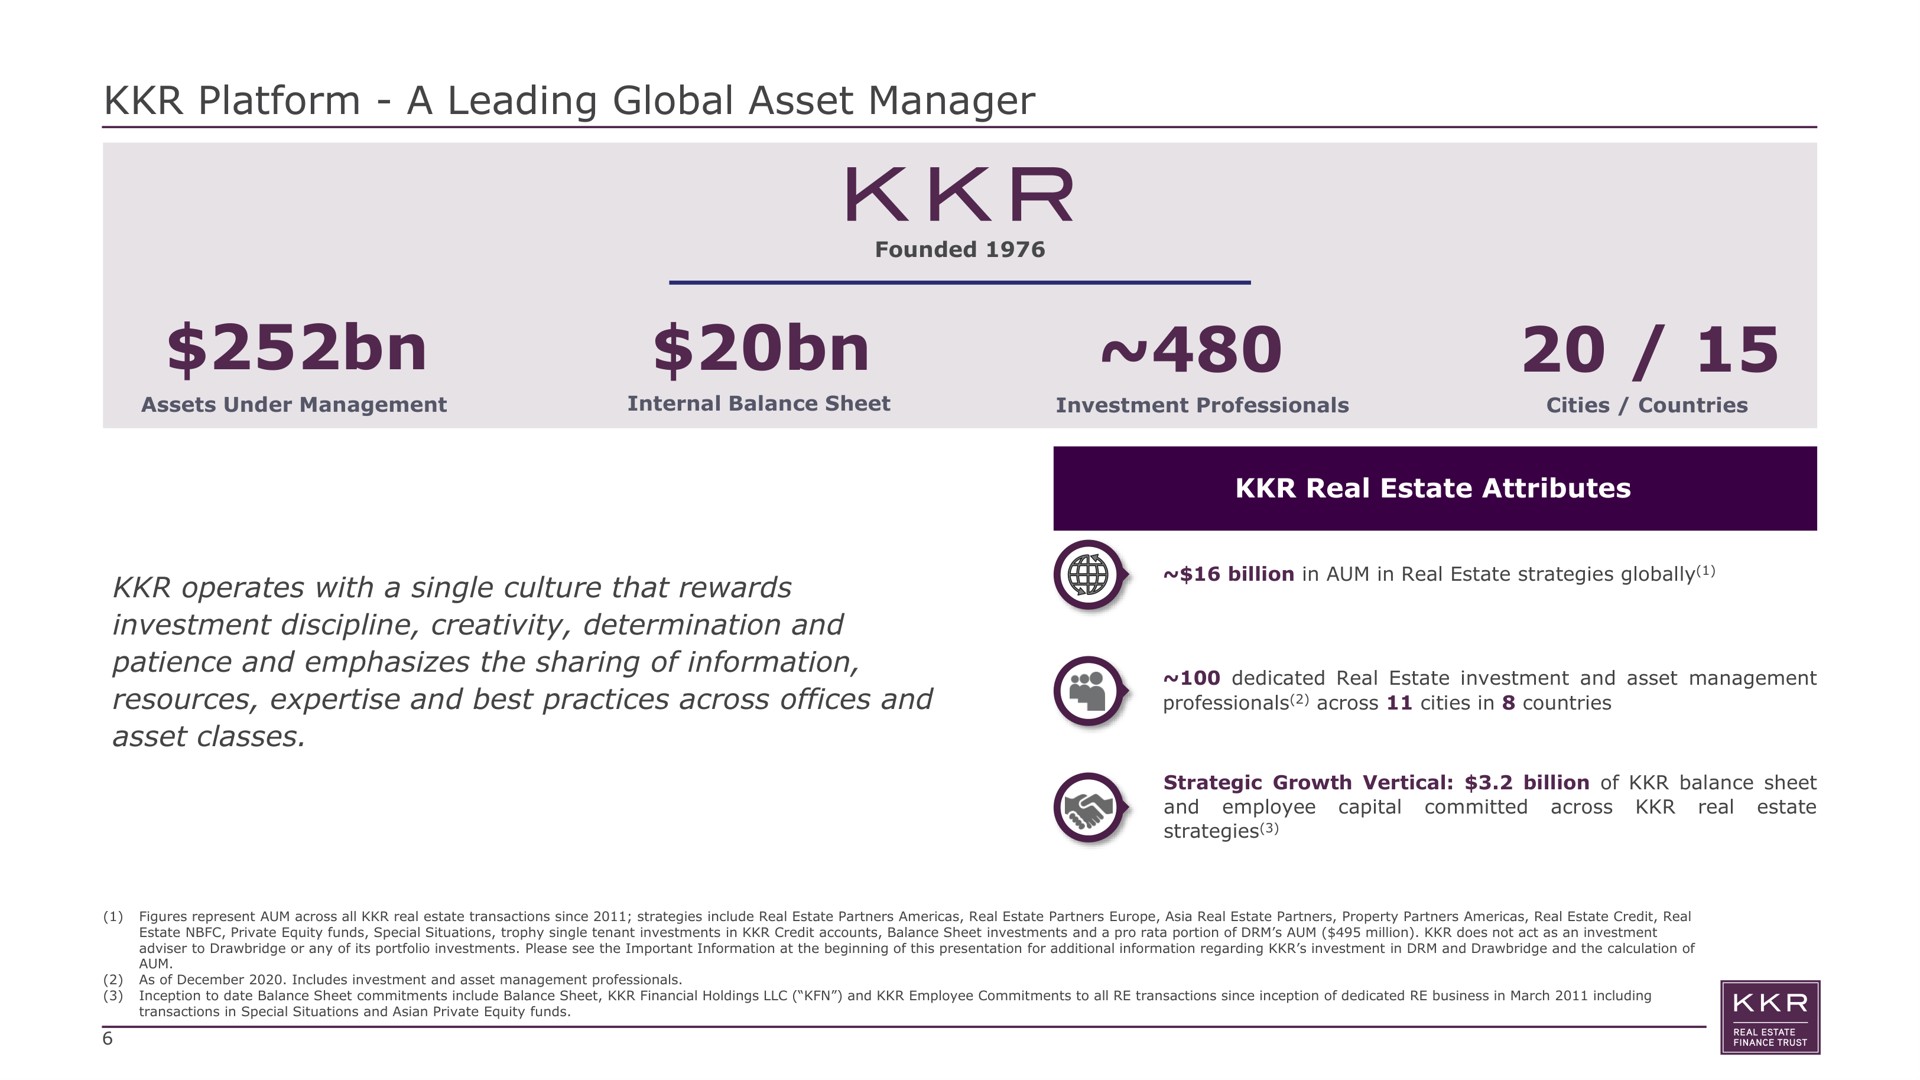 platform a leading global asset manager attributes real estate attributes operates with a single culture that rewards investment discipline creativity determination and patience and emphasizes the sharing of information resources and best practices across offices and asset classes sore arid sig ally gel | KKR Real Estate Finance Trust